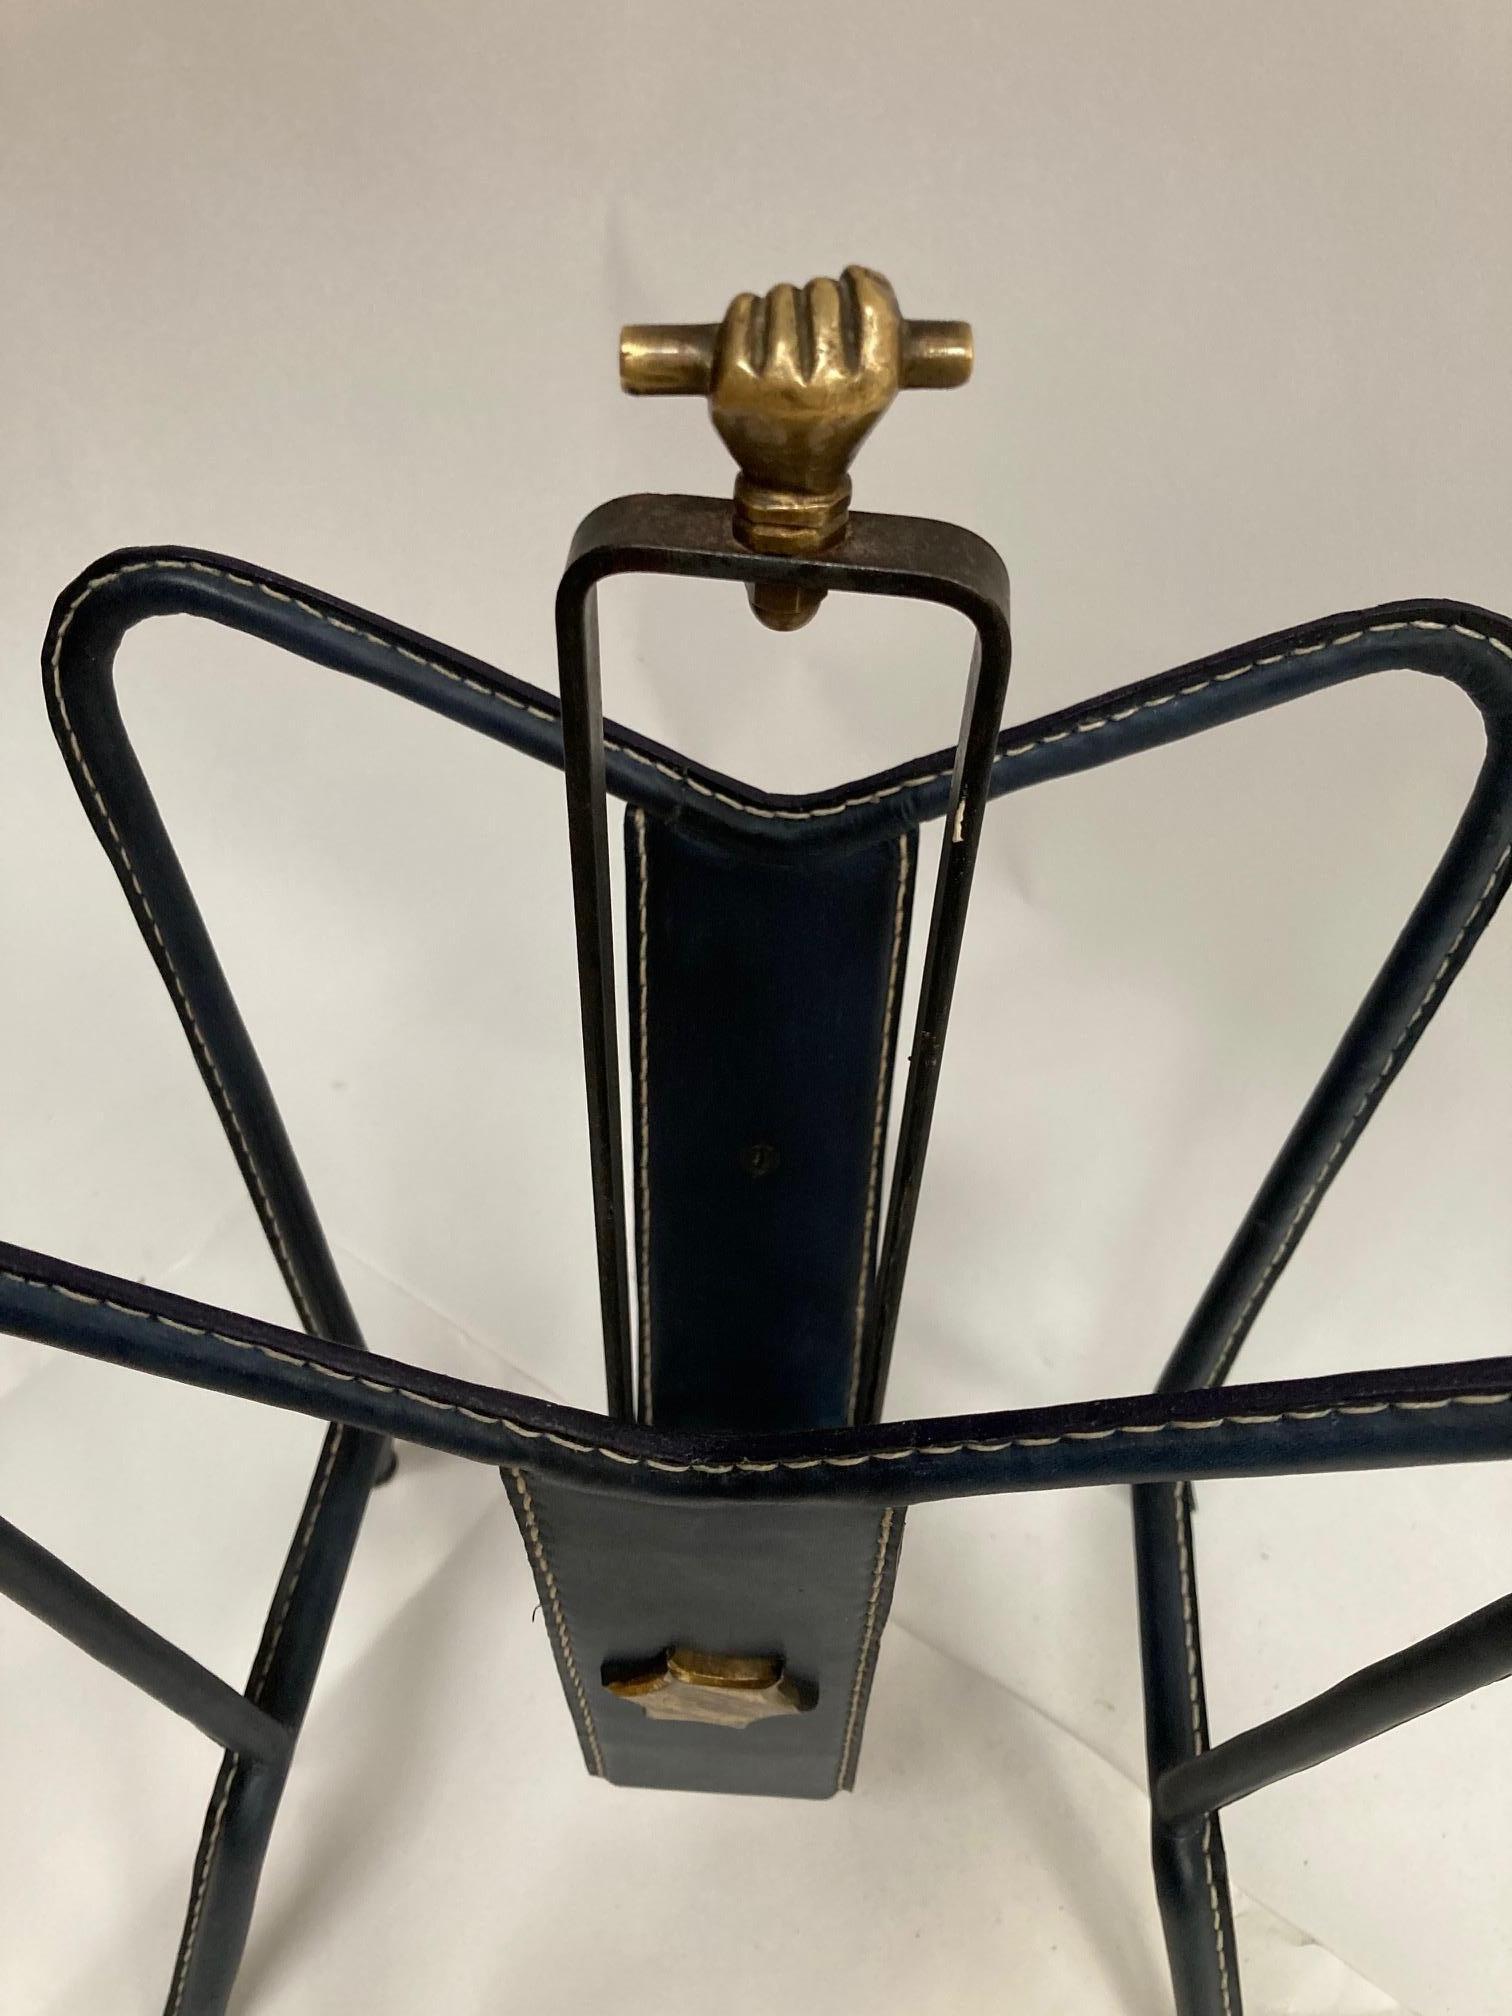 1950's Stitched Leather Magazines Rack by Jacques Adnet In Good Condition For Sale In Bois-Colombes, FR